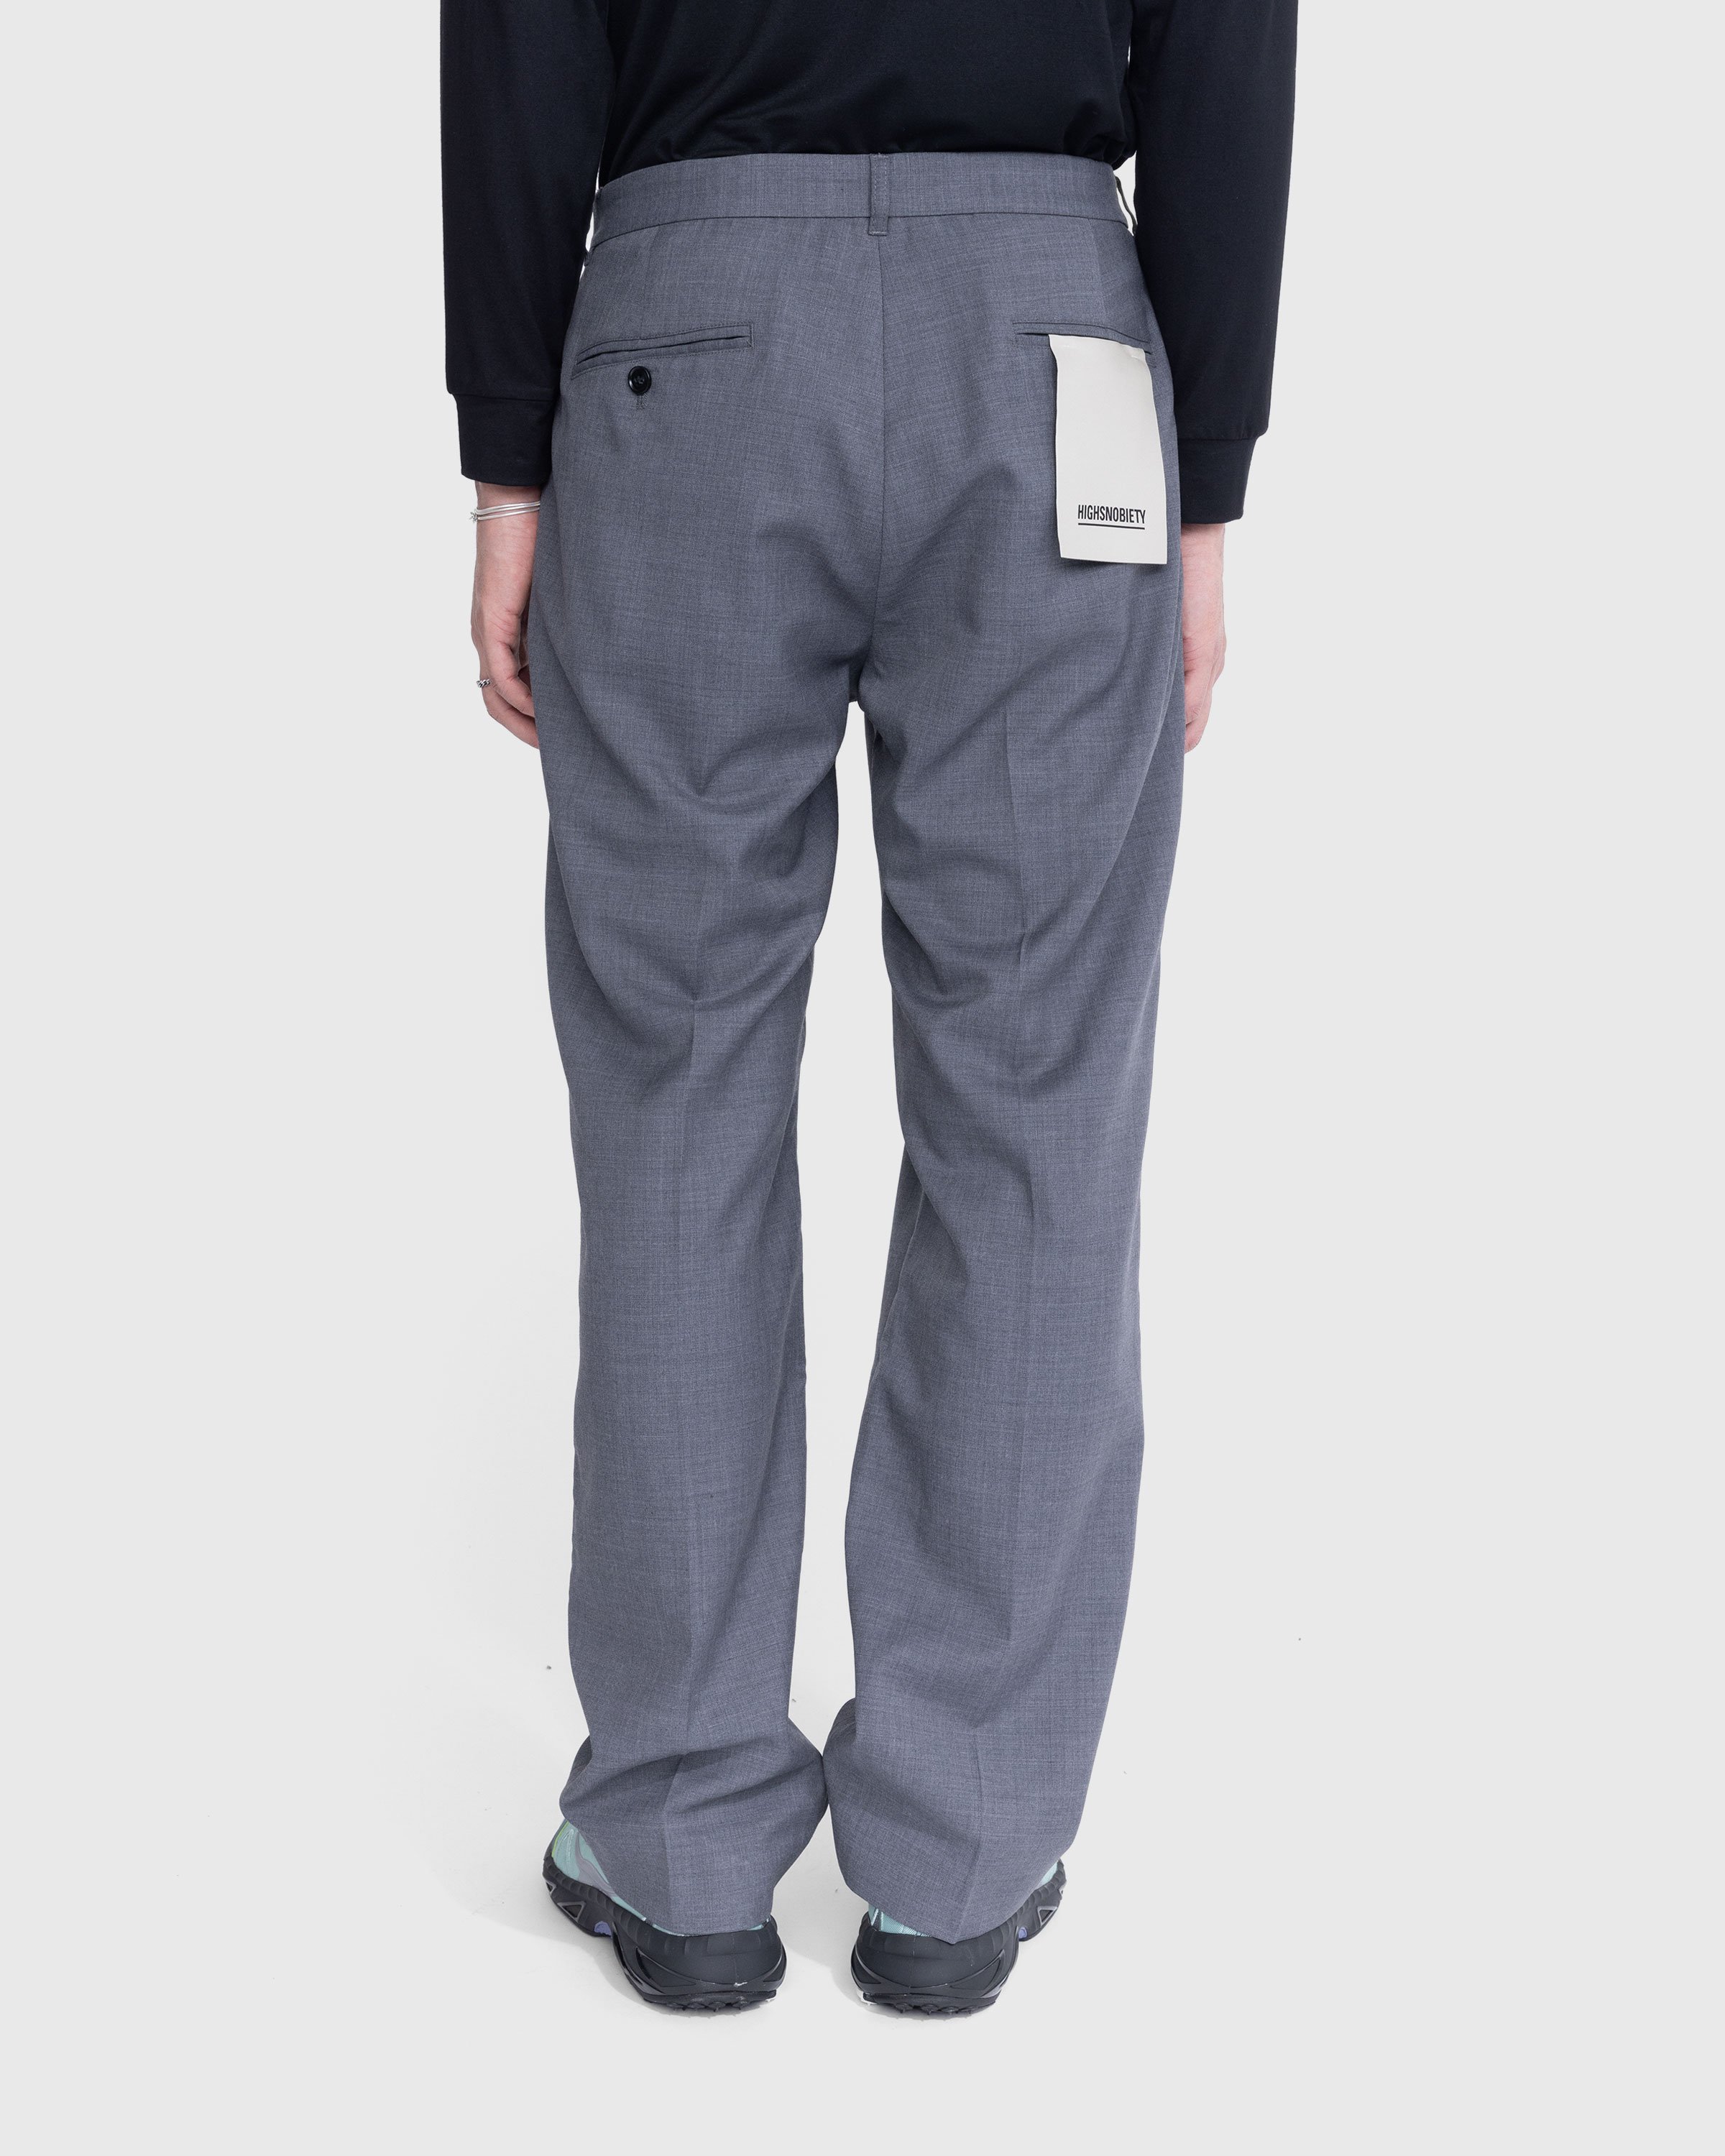 Highsnobiety - Tropical Wool Suiting Pants Grey - Clothing - Grey - Image 7